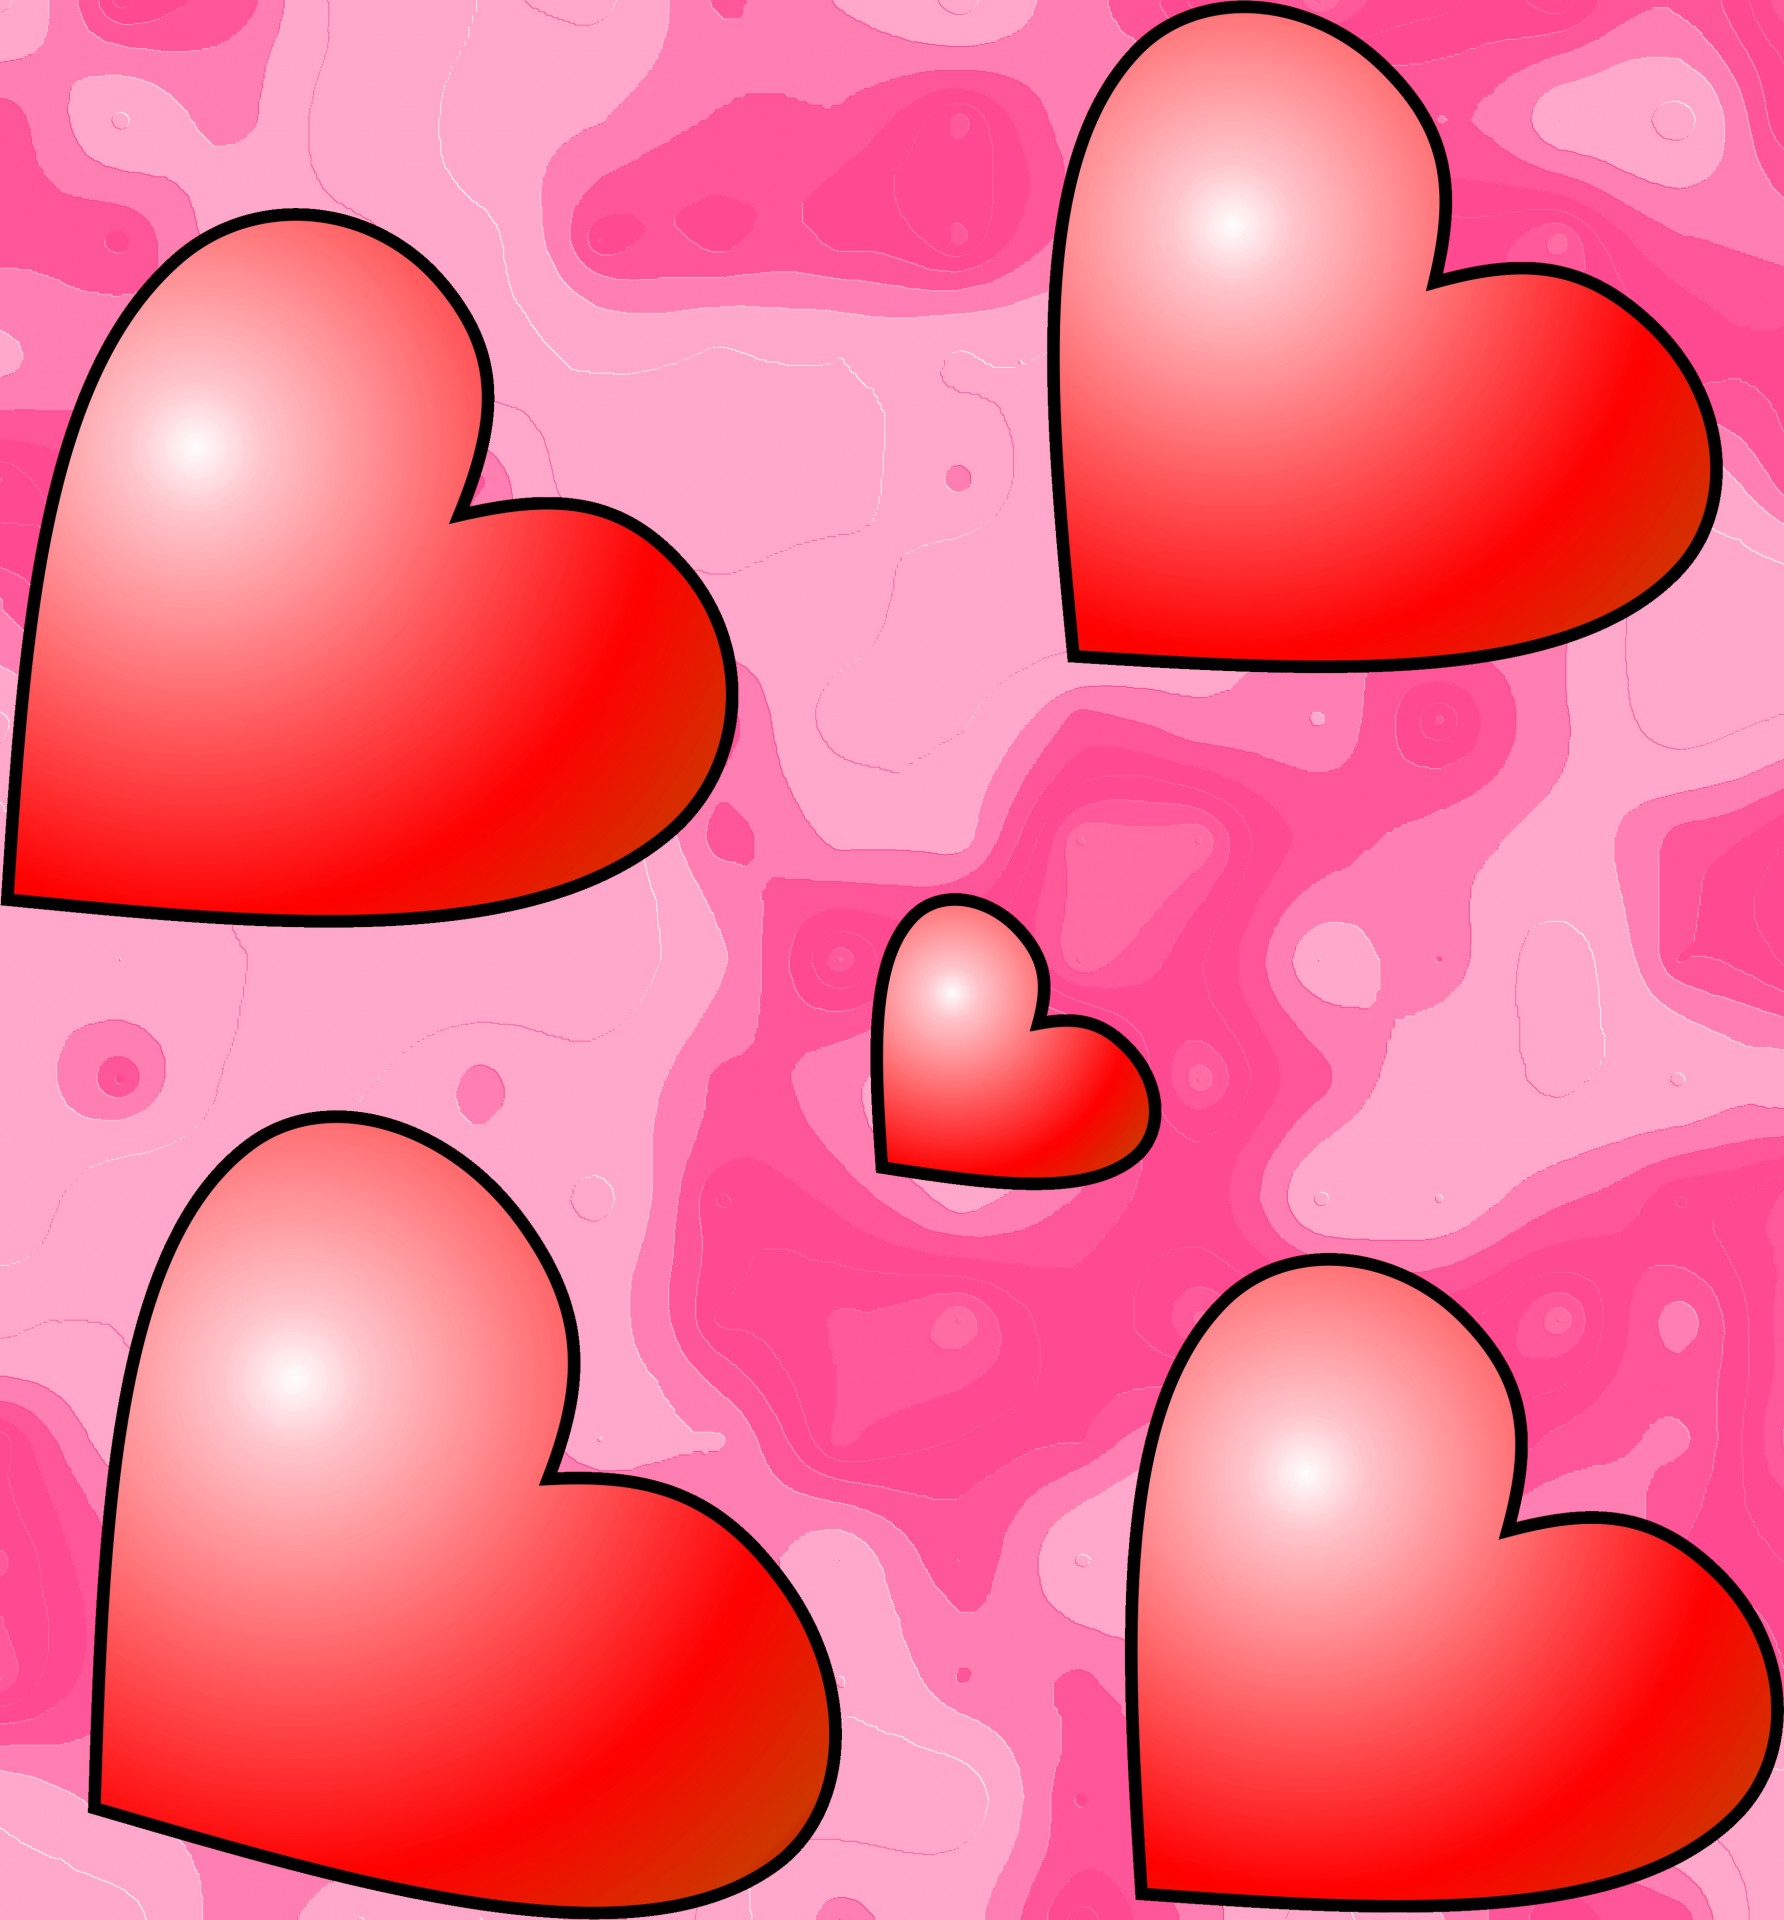 5 red hearts free photo